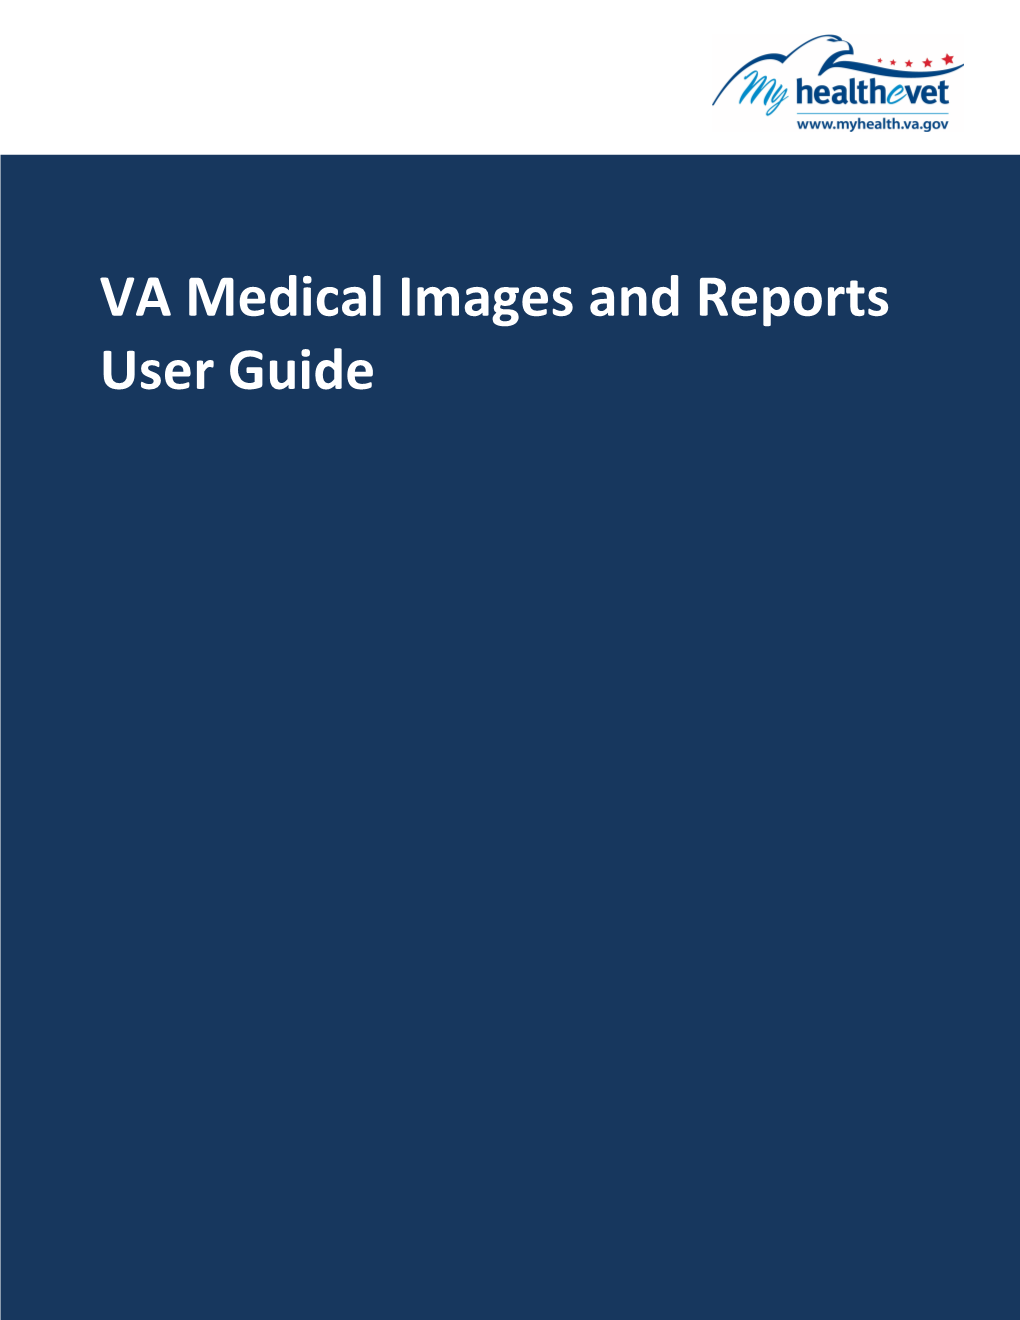 VA Medical Images and Reports User Guide